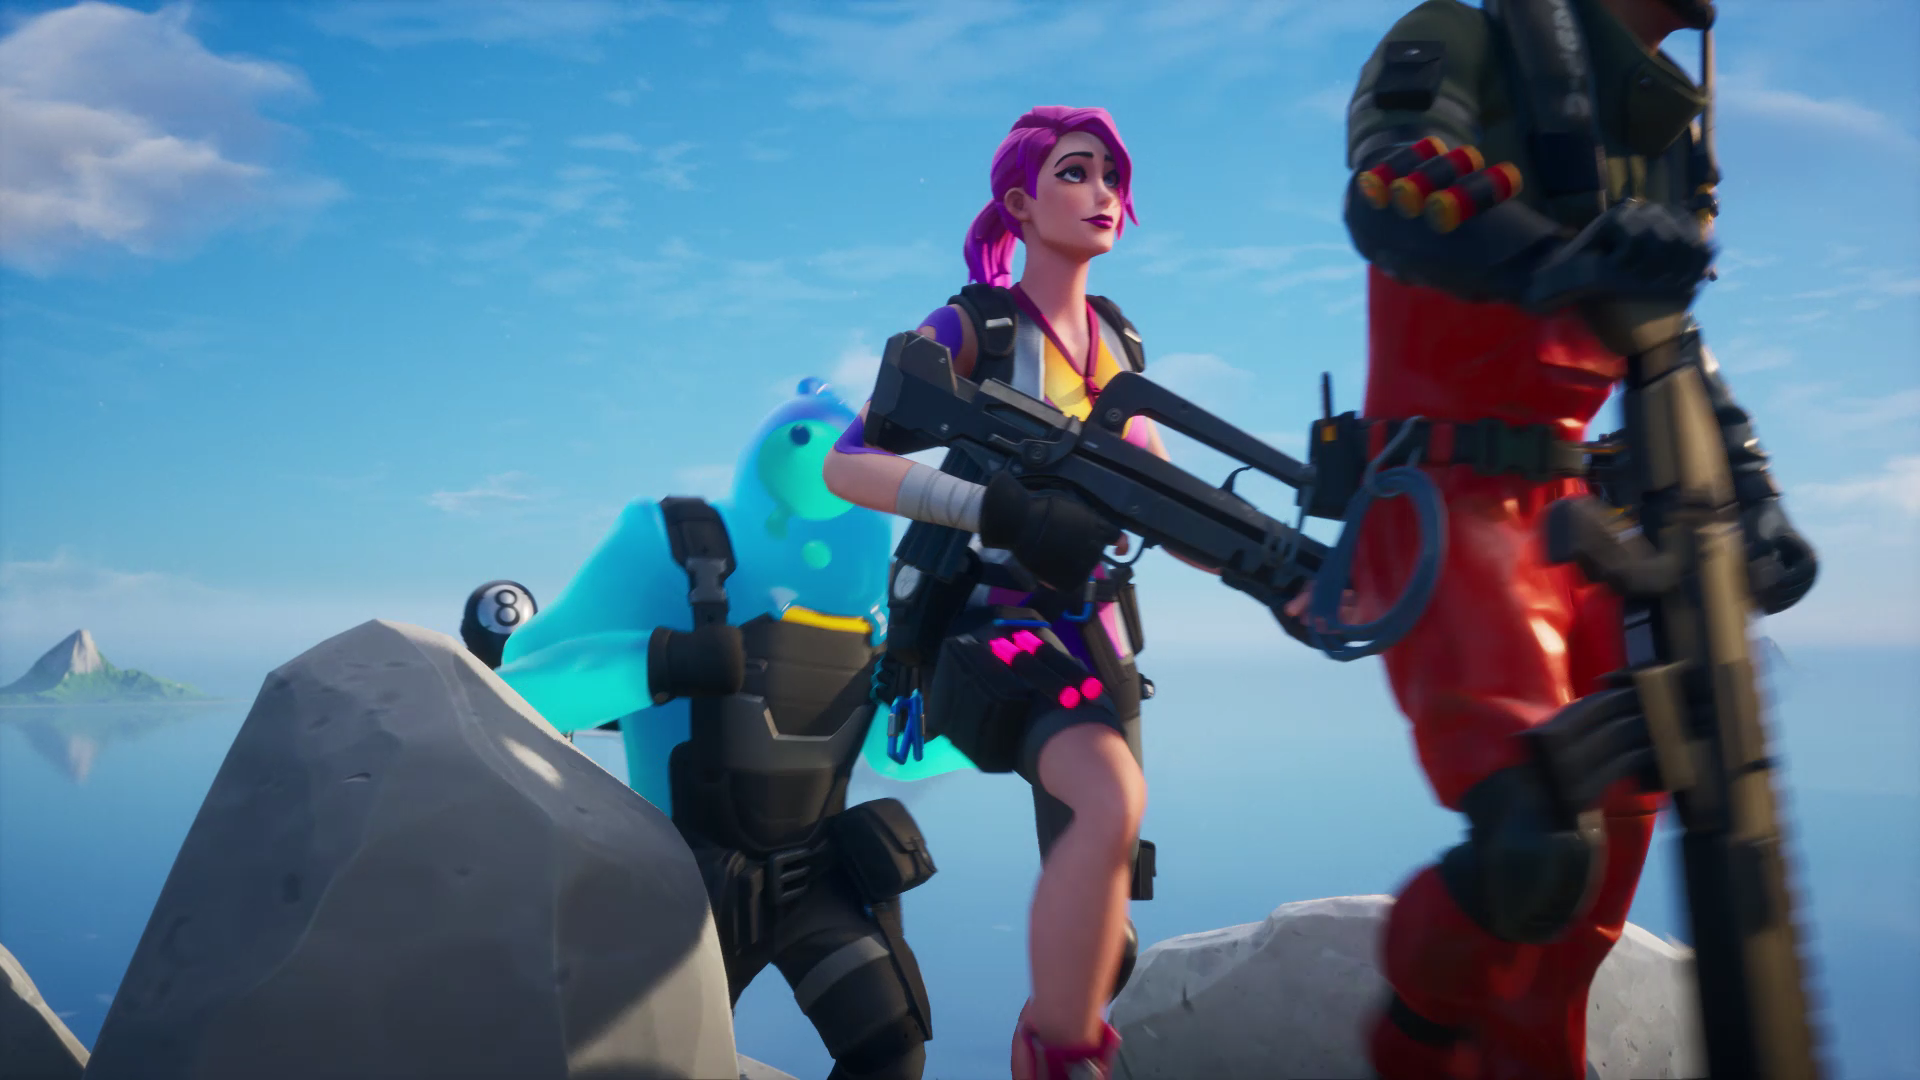 General 1920x1080 Fortnite Xbox One Epic Games video games